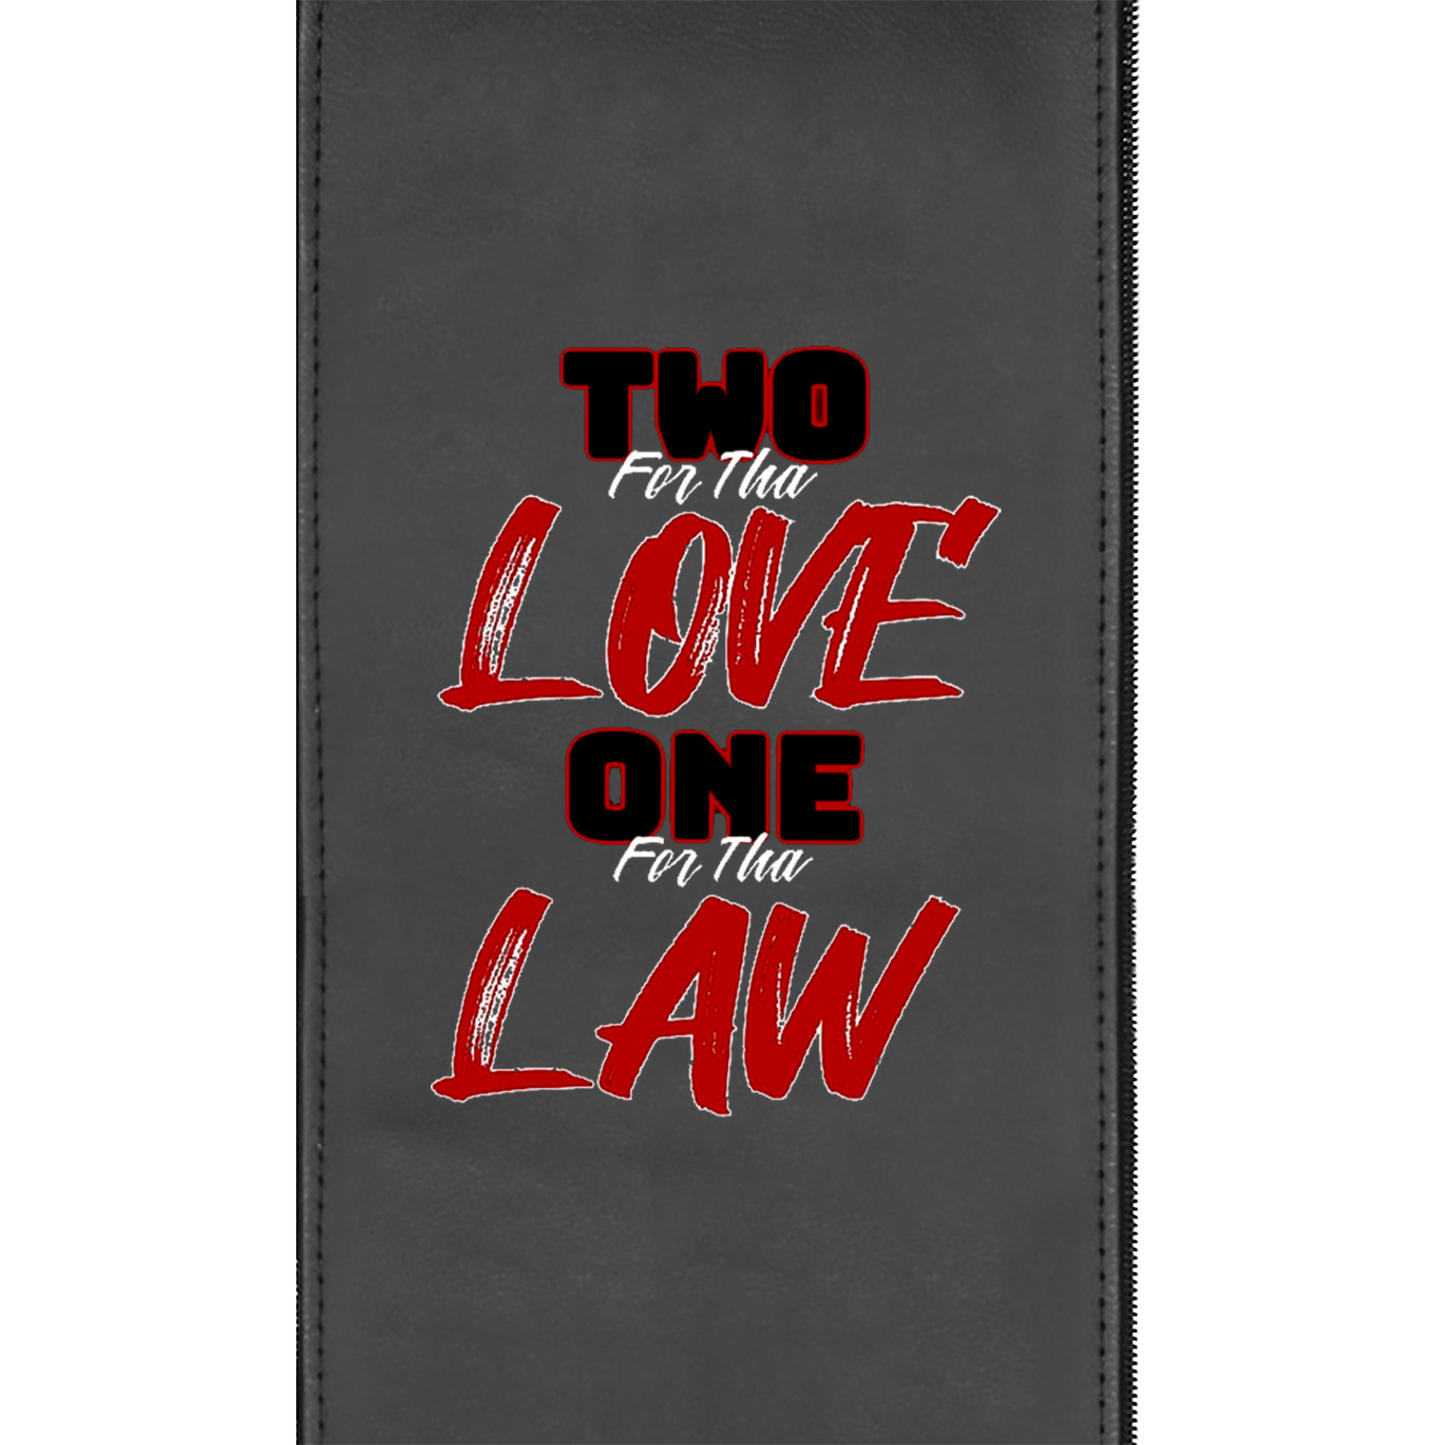 Phantomx Mesh Gaming Chair with Two For Tha Love One For Tha Law  Logo